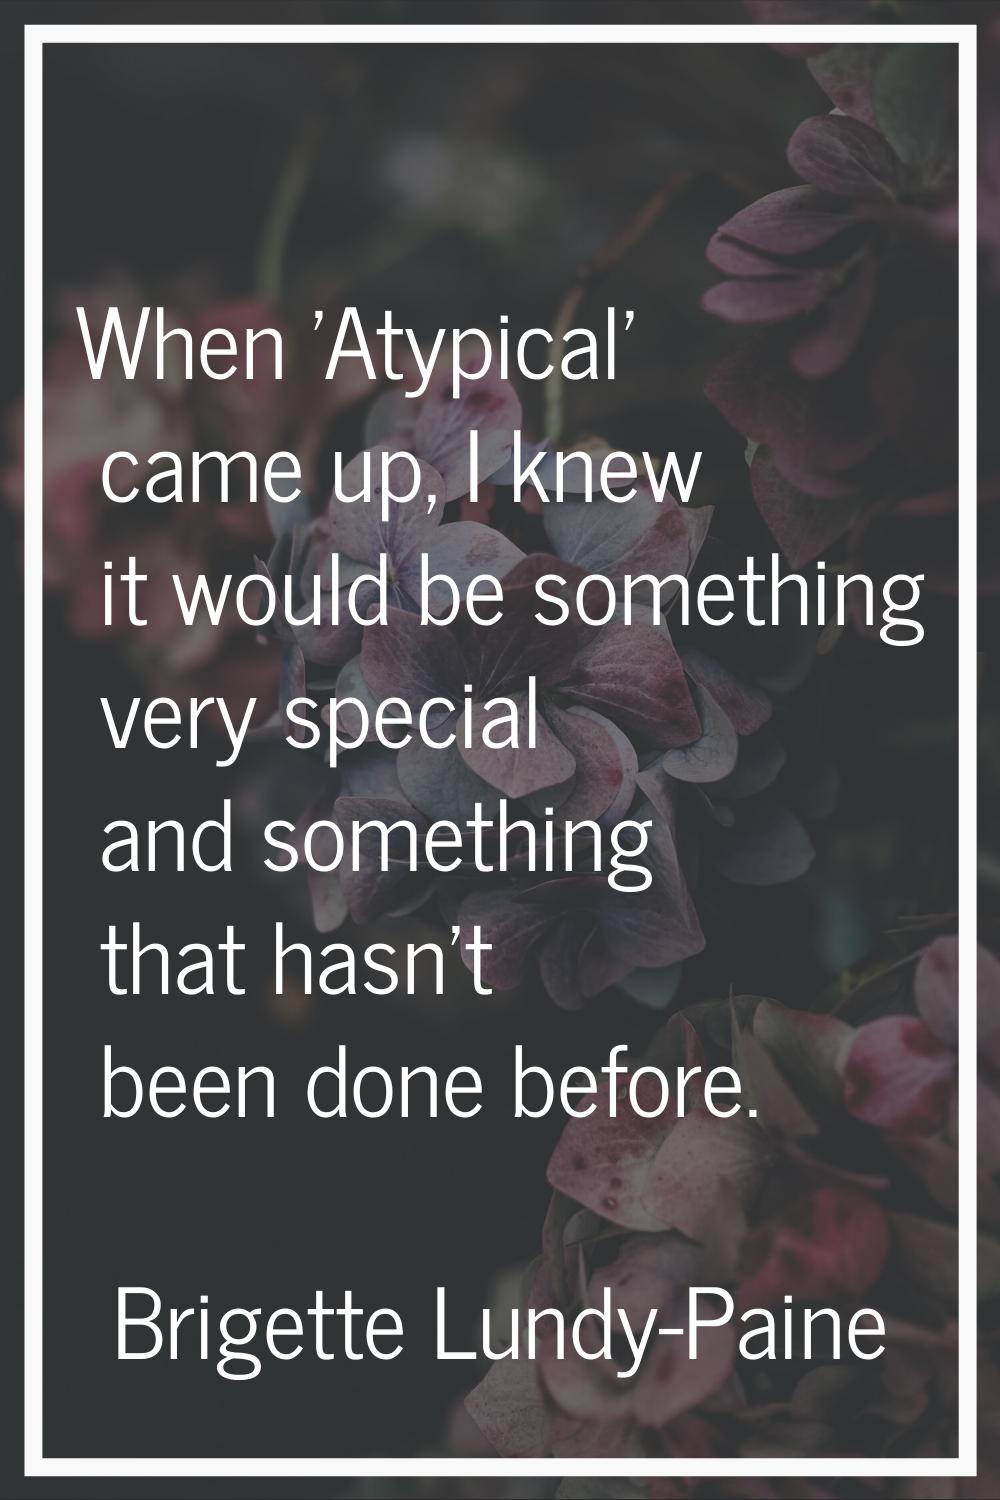 When 'Atypical' came up, I knew it would be something very special and something that hasn't been d